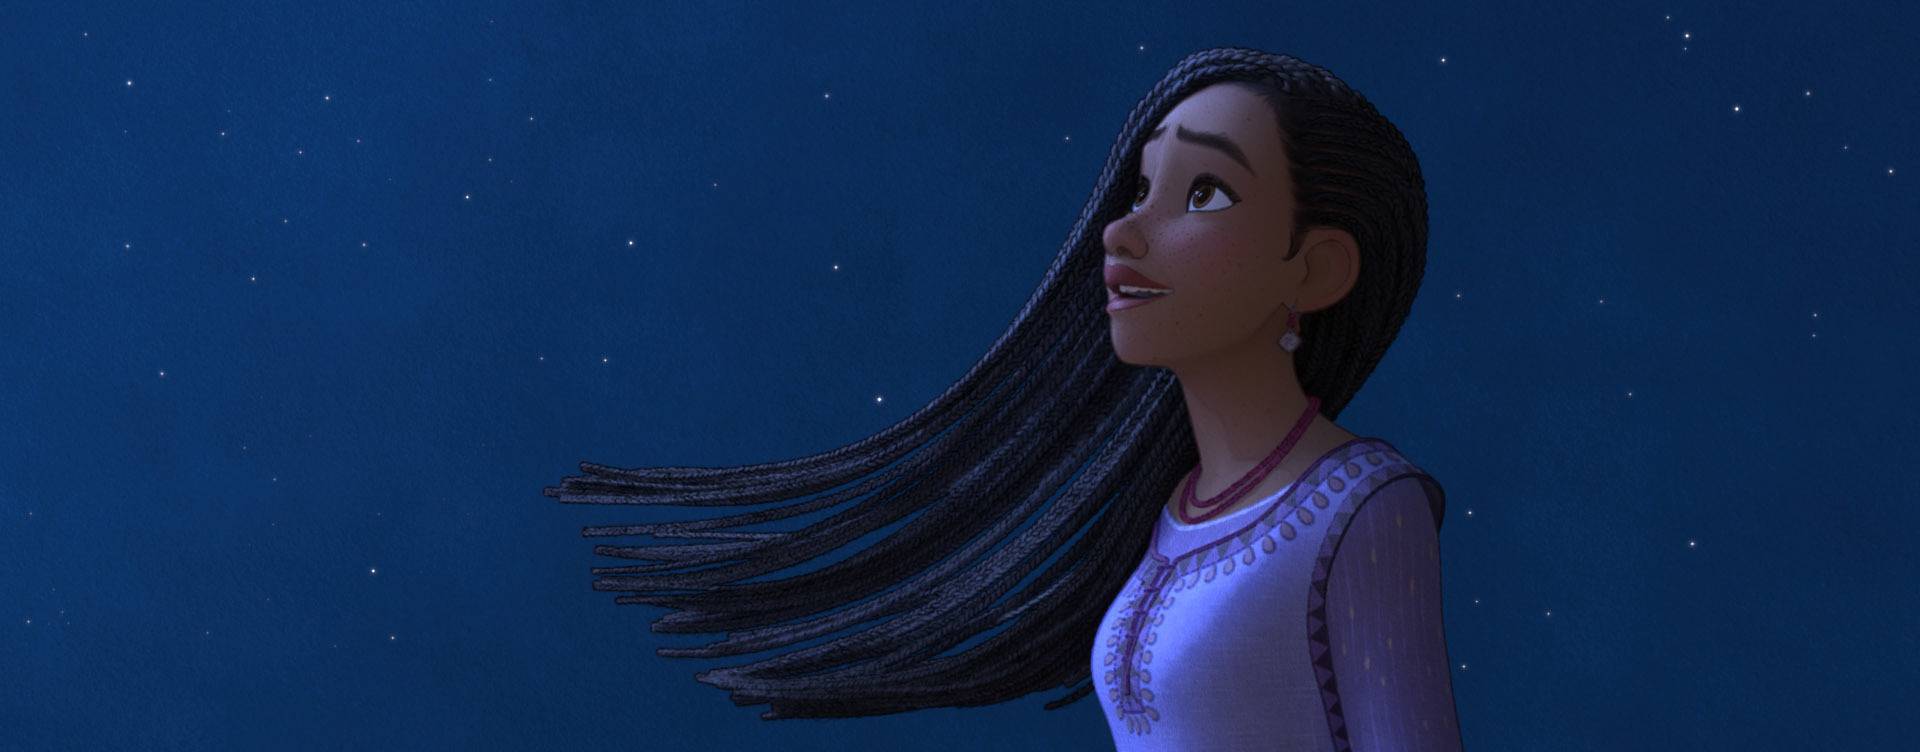 Walt Disney World casting for performers to play Asha from the upcoming animated musical 'Wish'